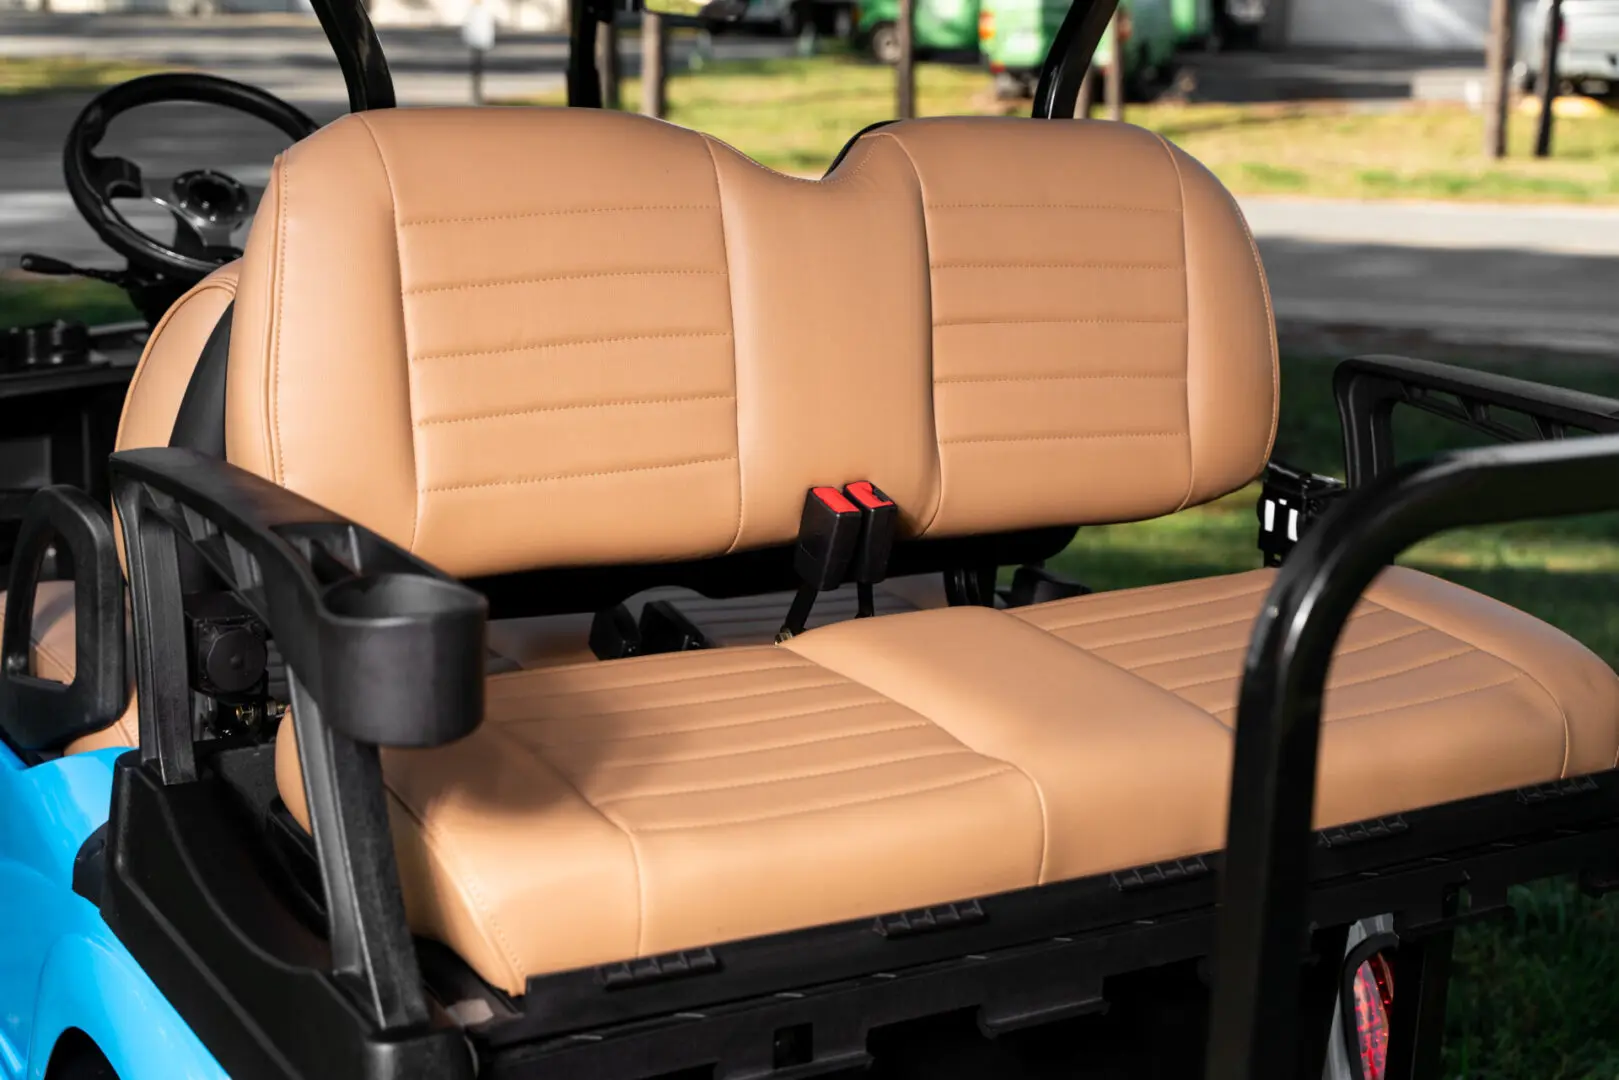 A close up of the back seats on a golf cart